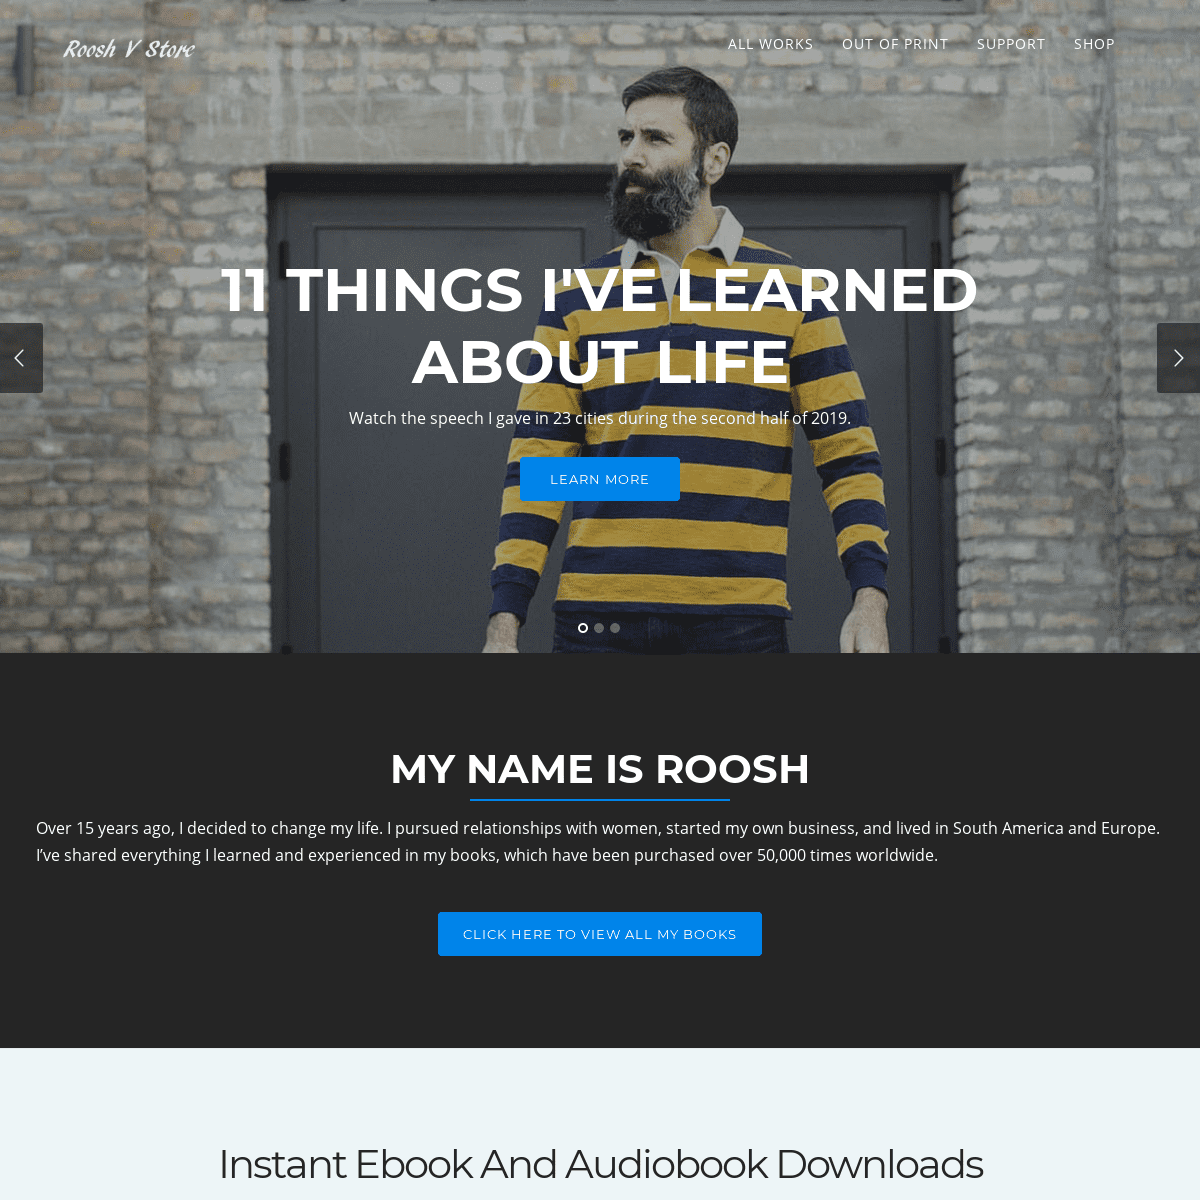 A complete backup of rooshvstore.com